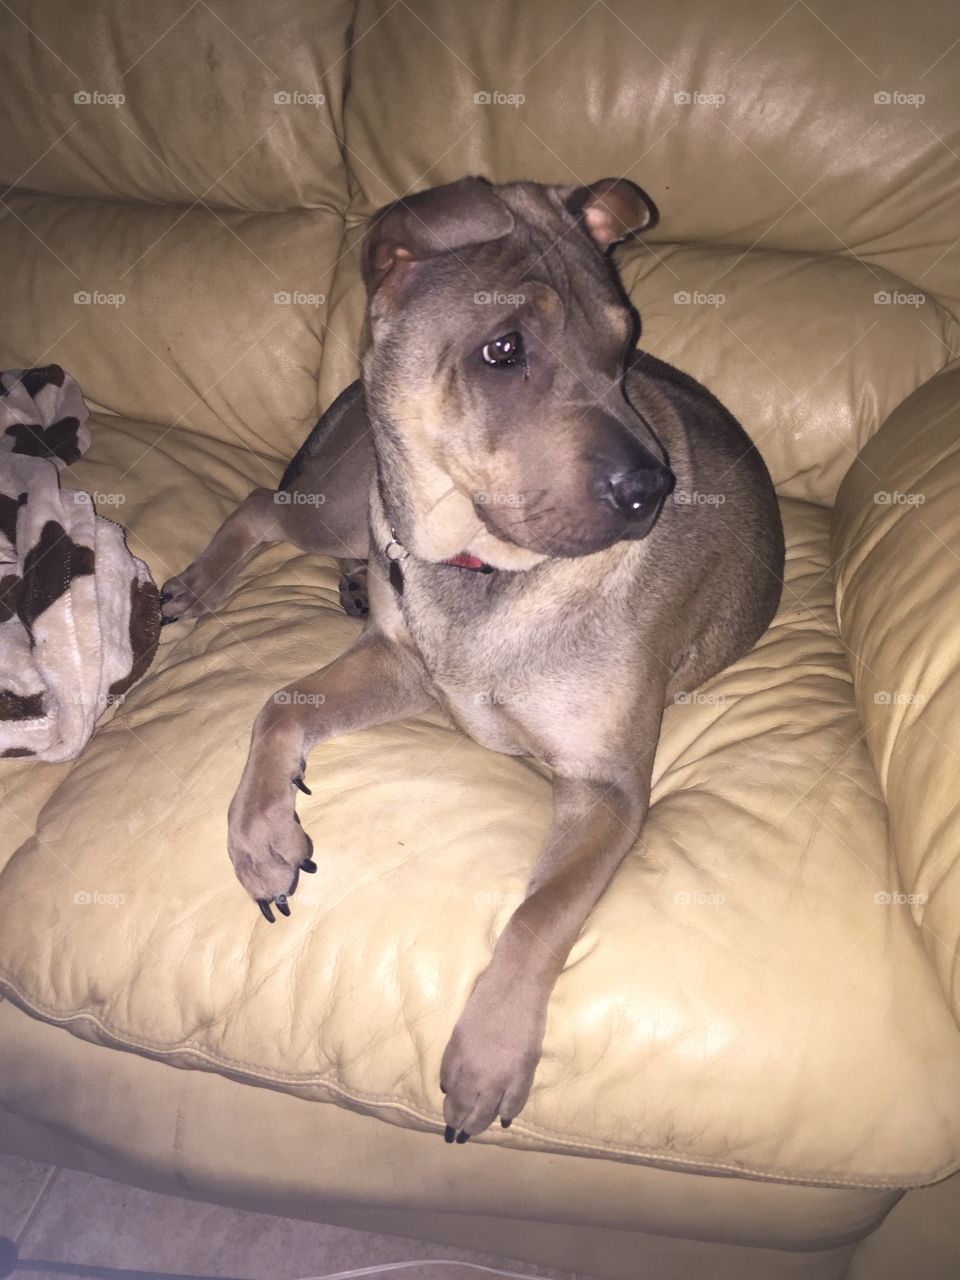 Chinese shar pei puppy on a couch